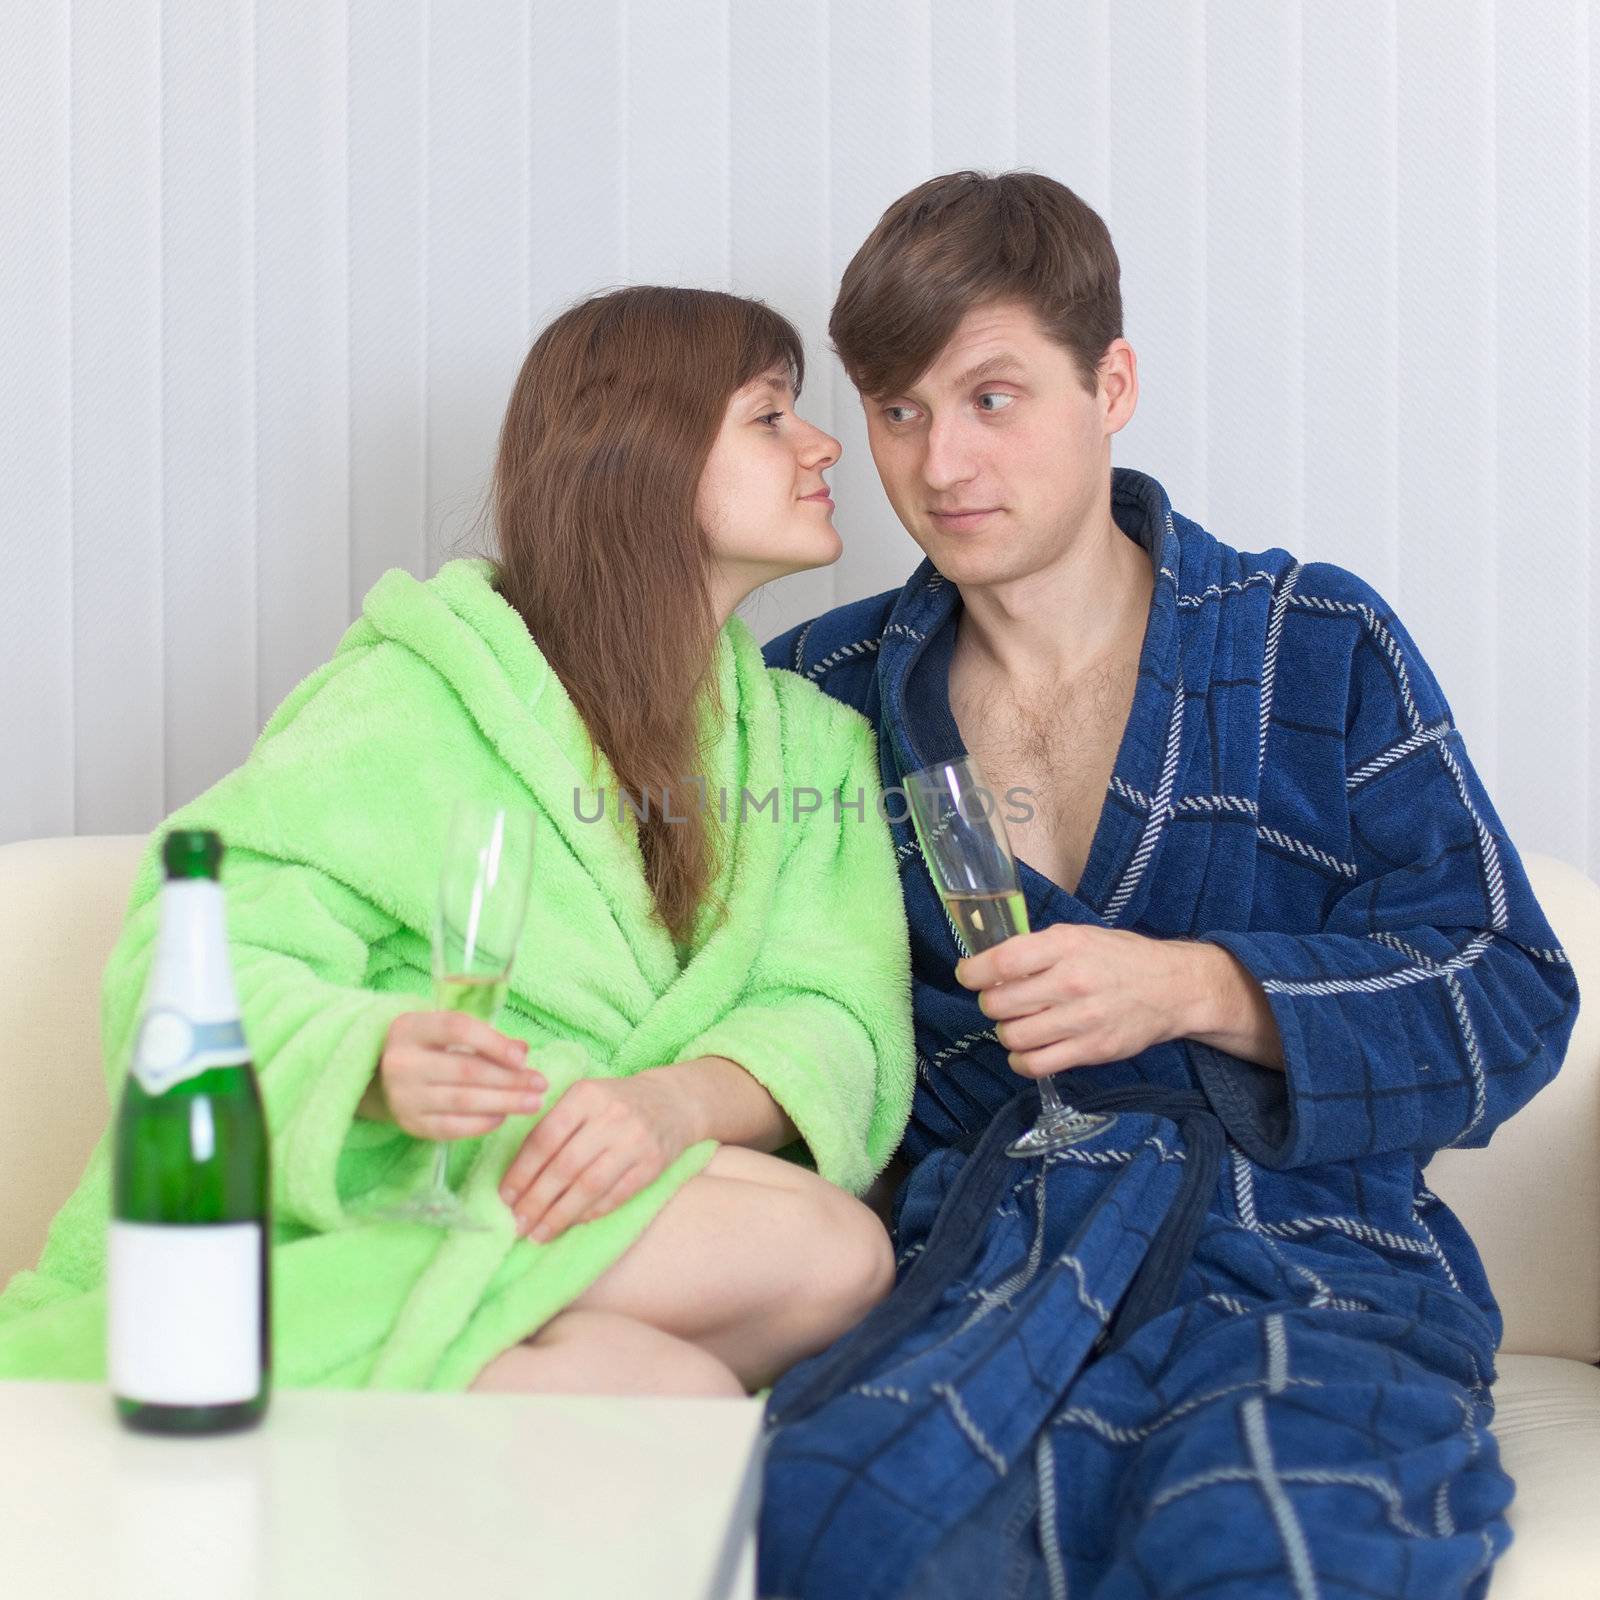 The guy and the girl drink  champagne wine on a sofa